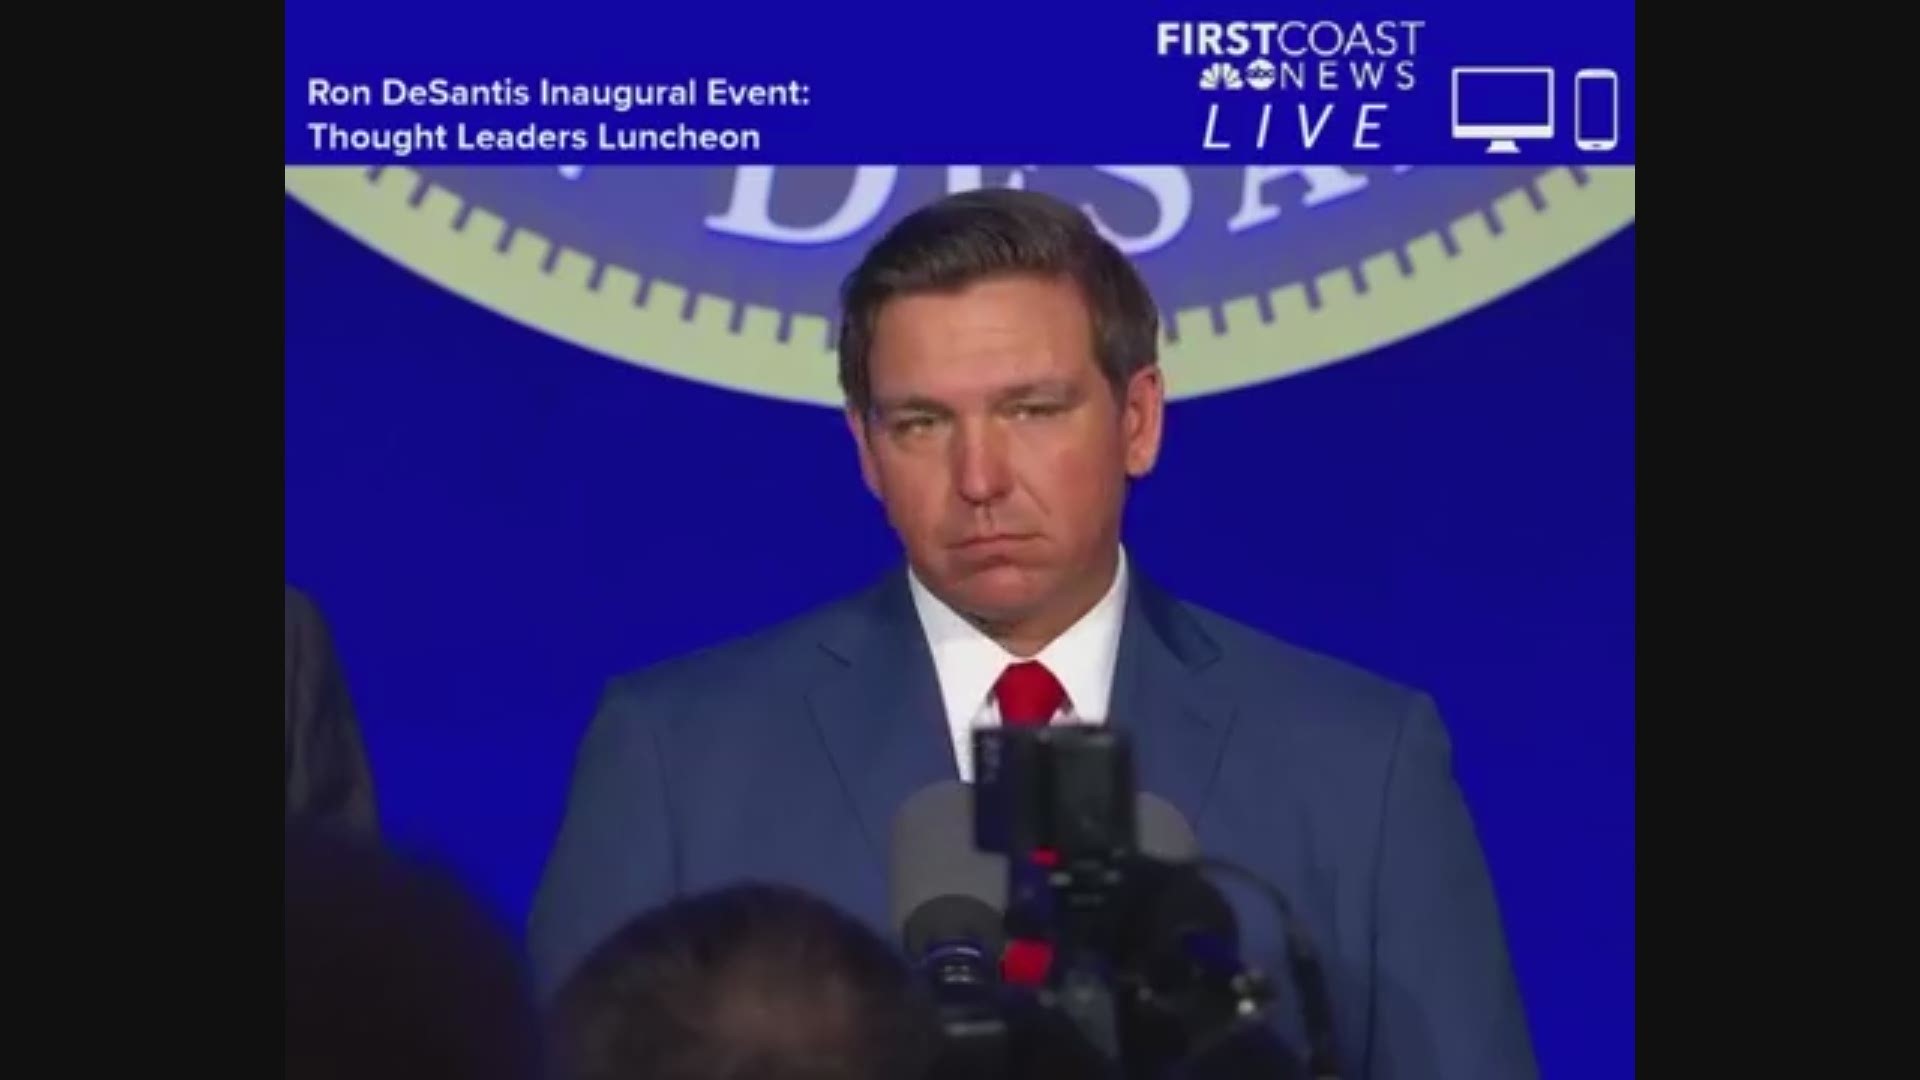 During a luncheon ahead of his swearing-in ceremony in Tallahassee, Fla. Gov. Ron DeSantis mentioned traveling in a plane that was seized in a drug bust.